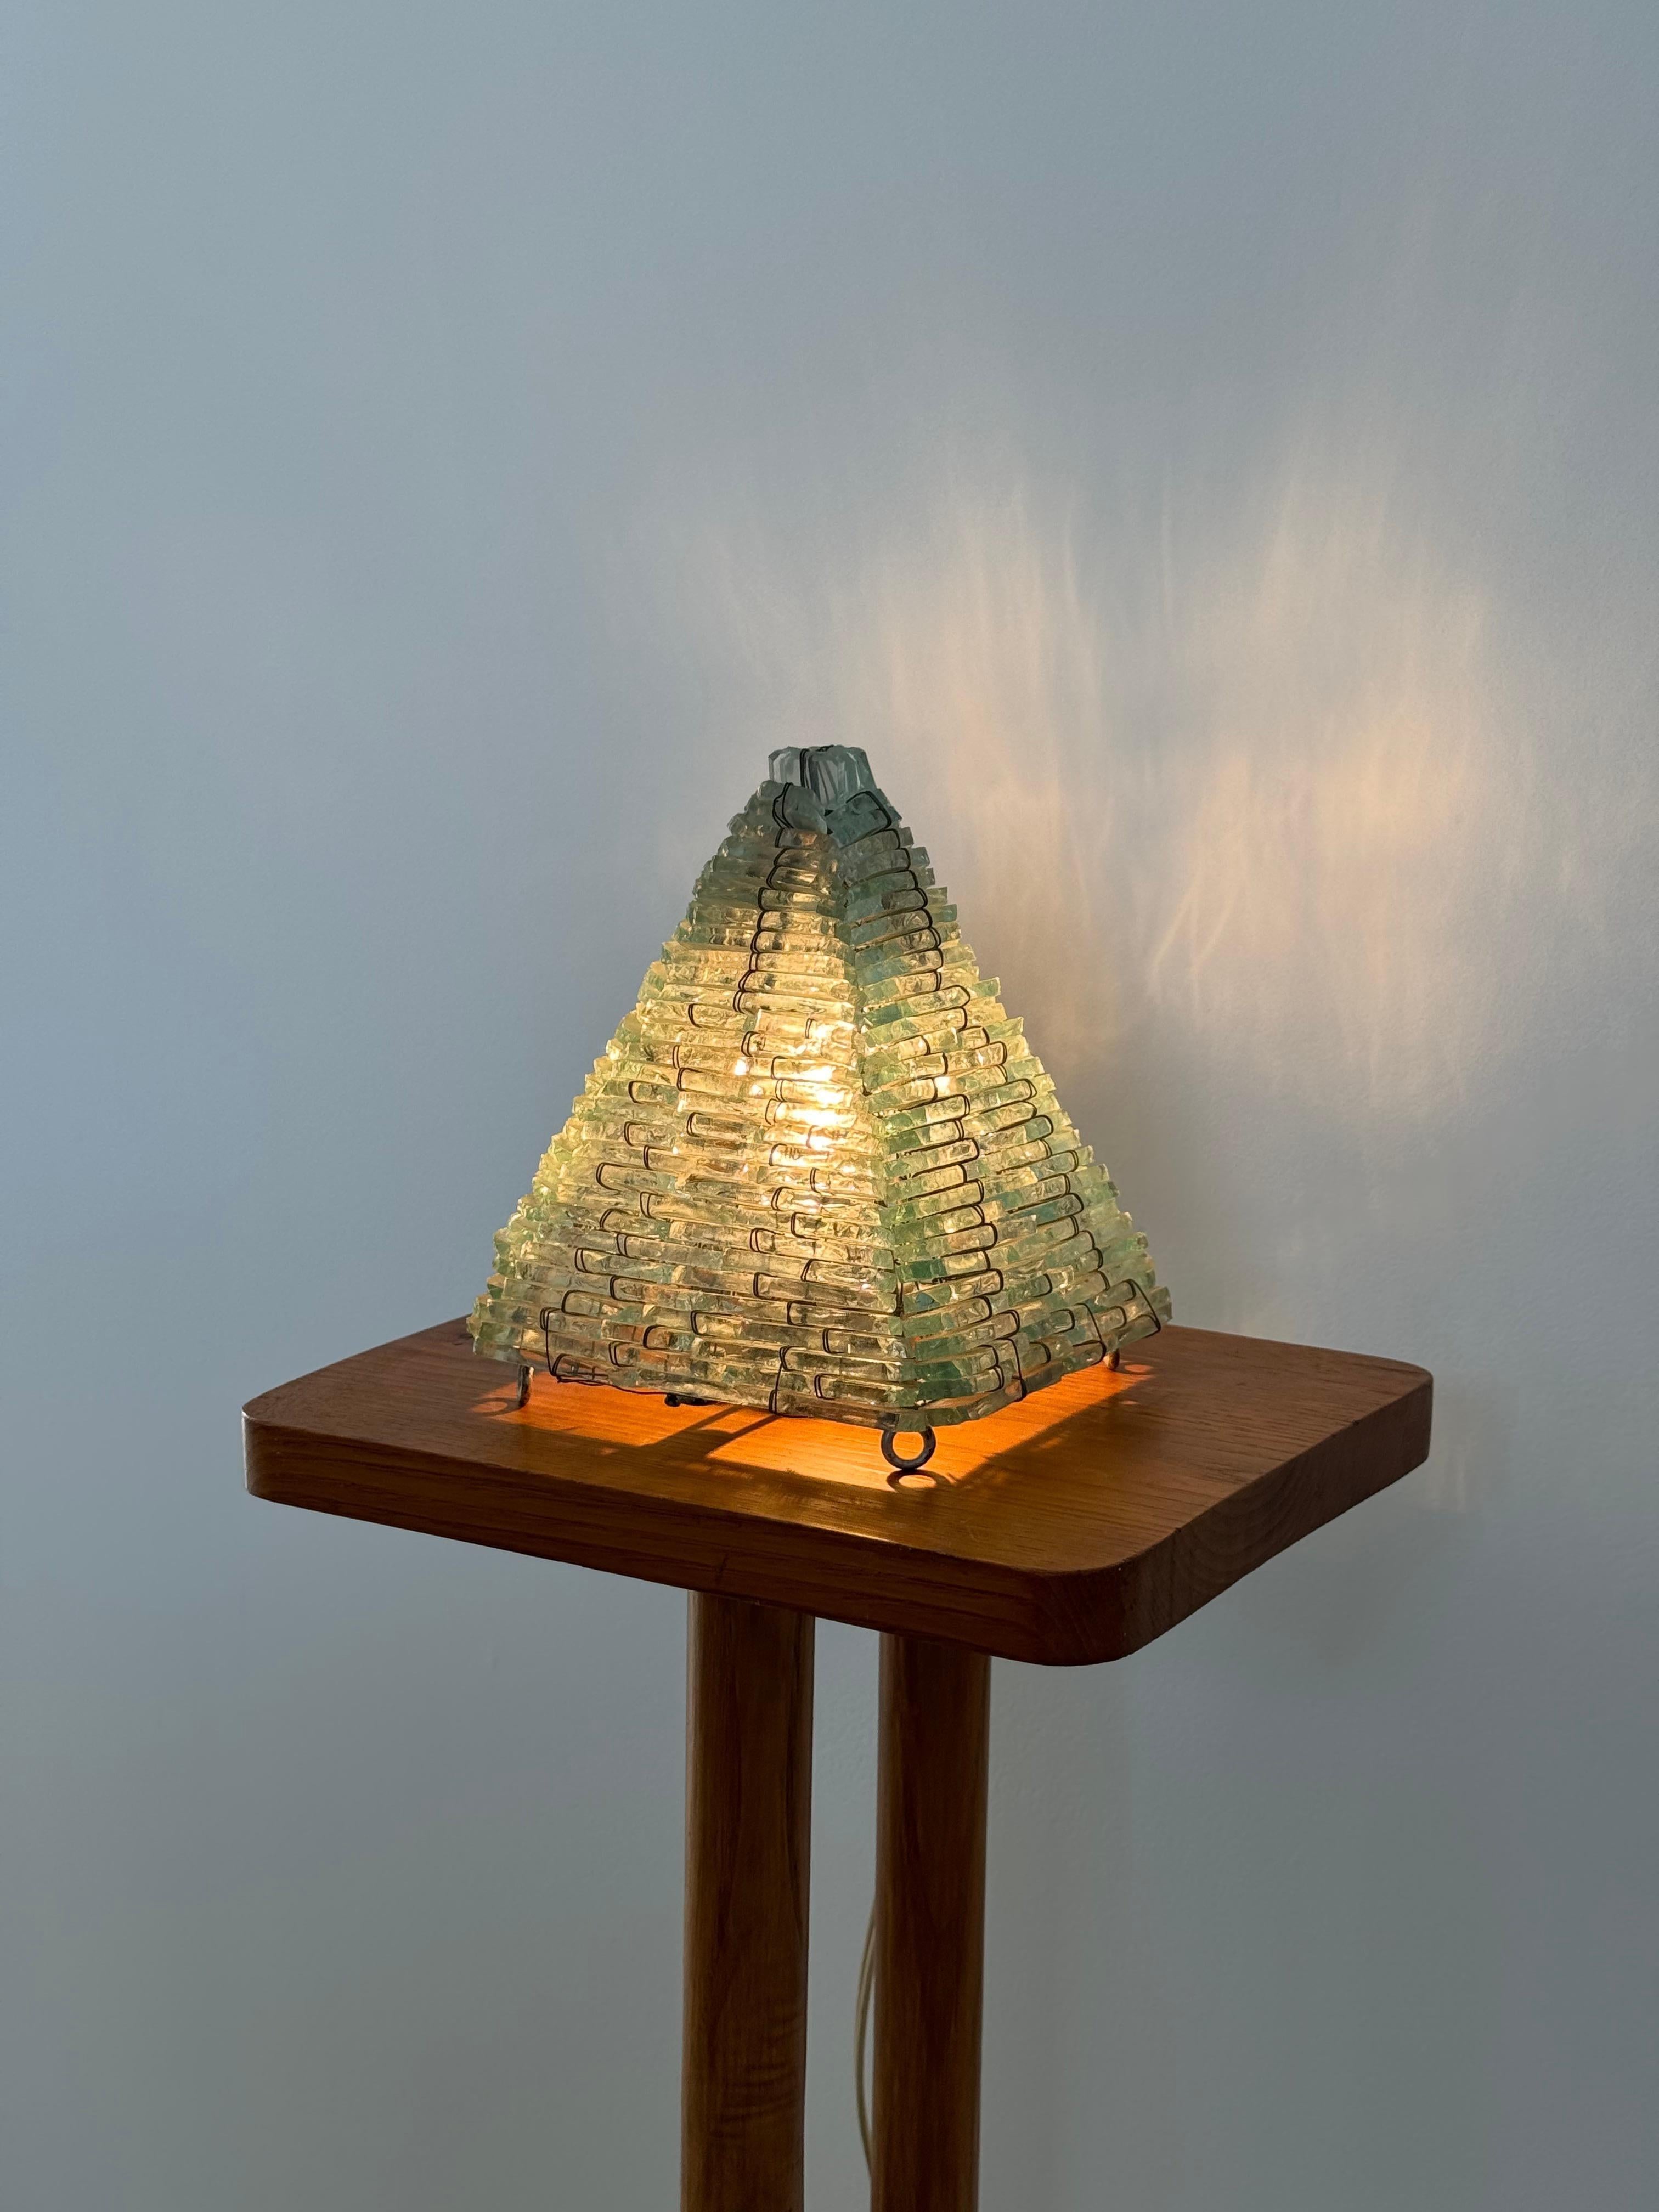 Sculptural lamp in the shape of a pyramid. Assembly of glass blocks. Lamp entirely handmade.
Lighting and light diffused with total softness.
French design from the 1960s.

free shipping 